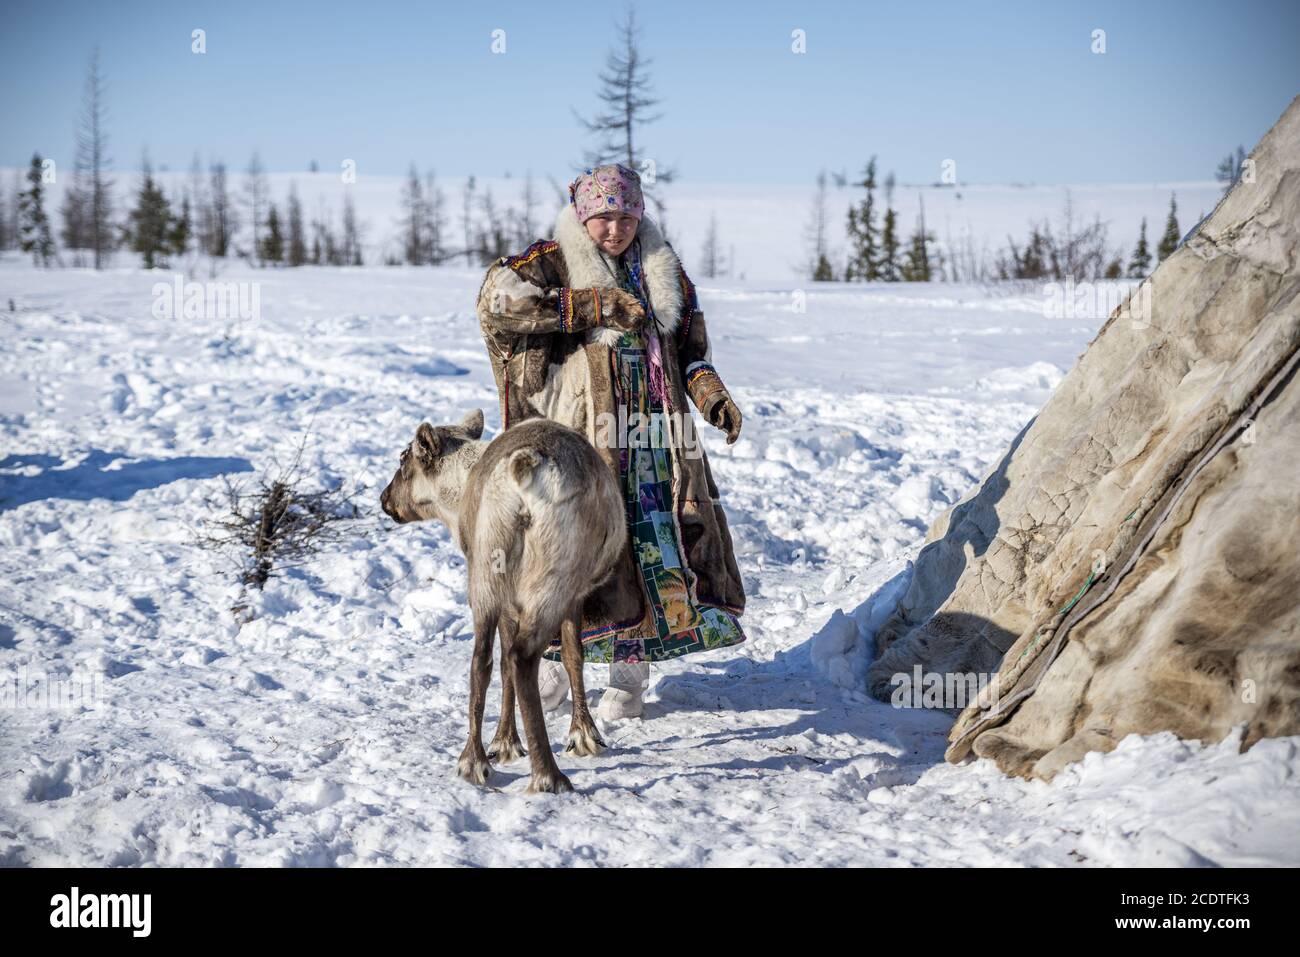 A Nenet woman with an 'avka' (per reindeer) close to a chum (tent) in the RUssian tundra, Yamalo-Nenets Autonomous Okrug, Russia Stock Photo